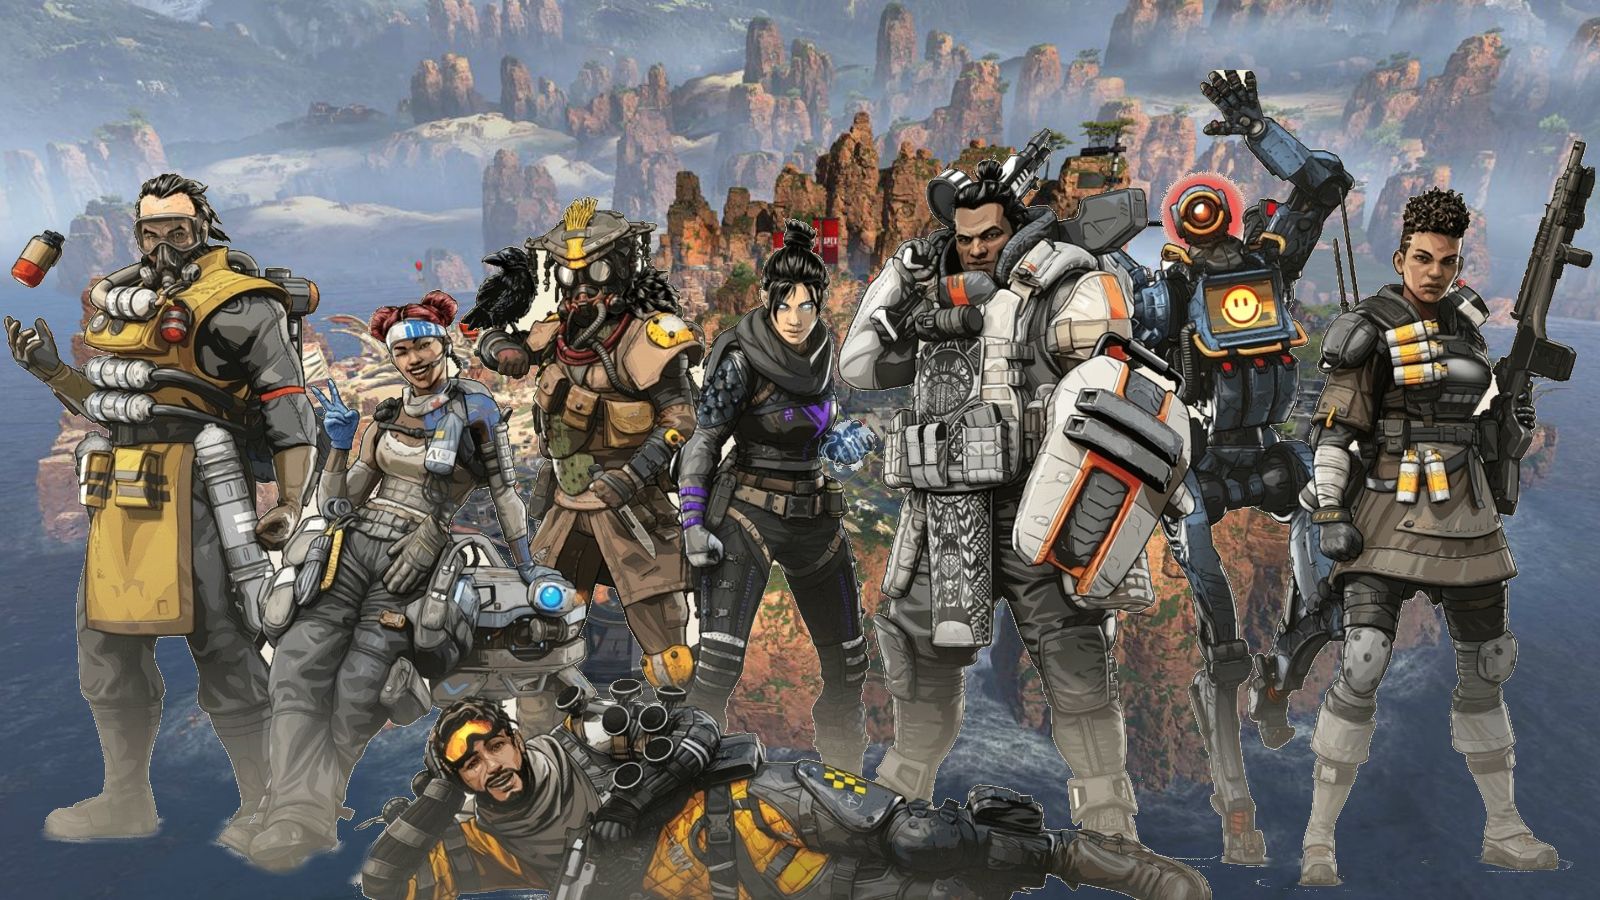 What you need to know about the leaked Apex Legends character